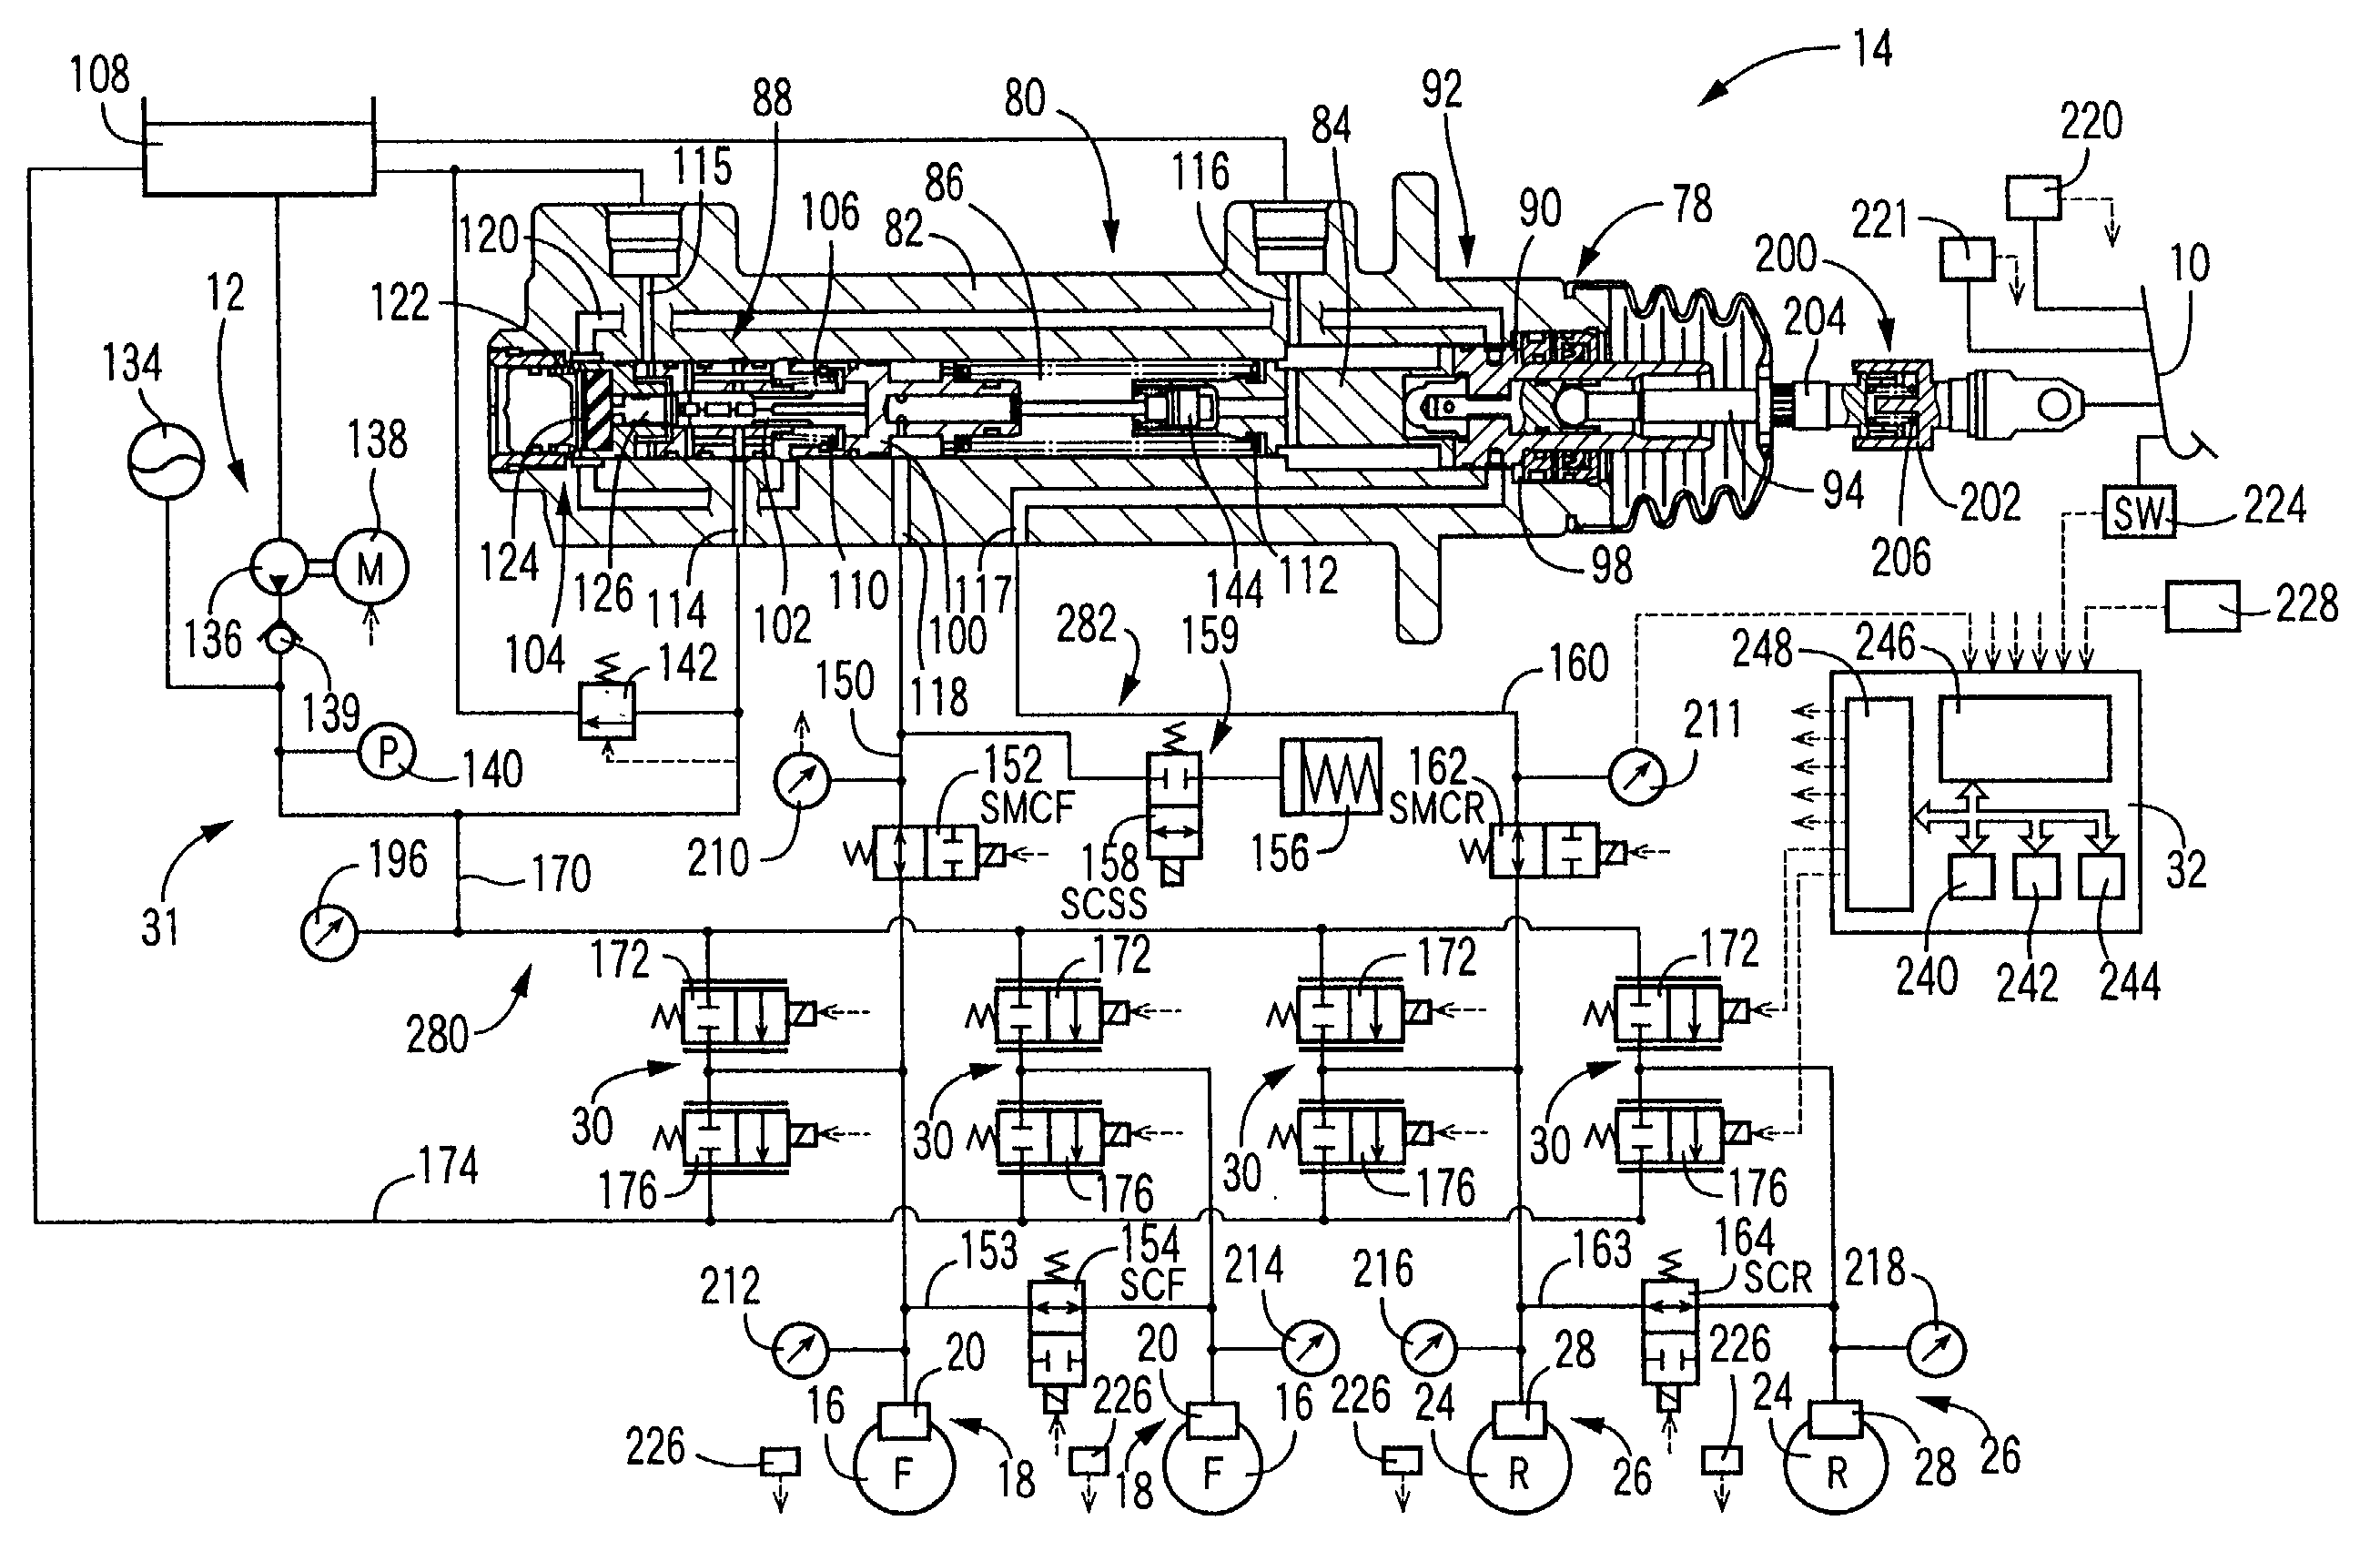 Braking pressure control apparatus capable of switching between two brake operating states using power-operated and manually operated pressure sources, respectively